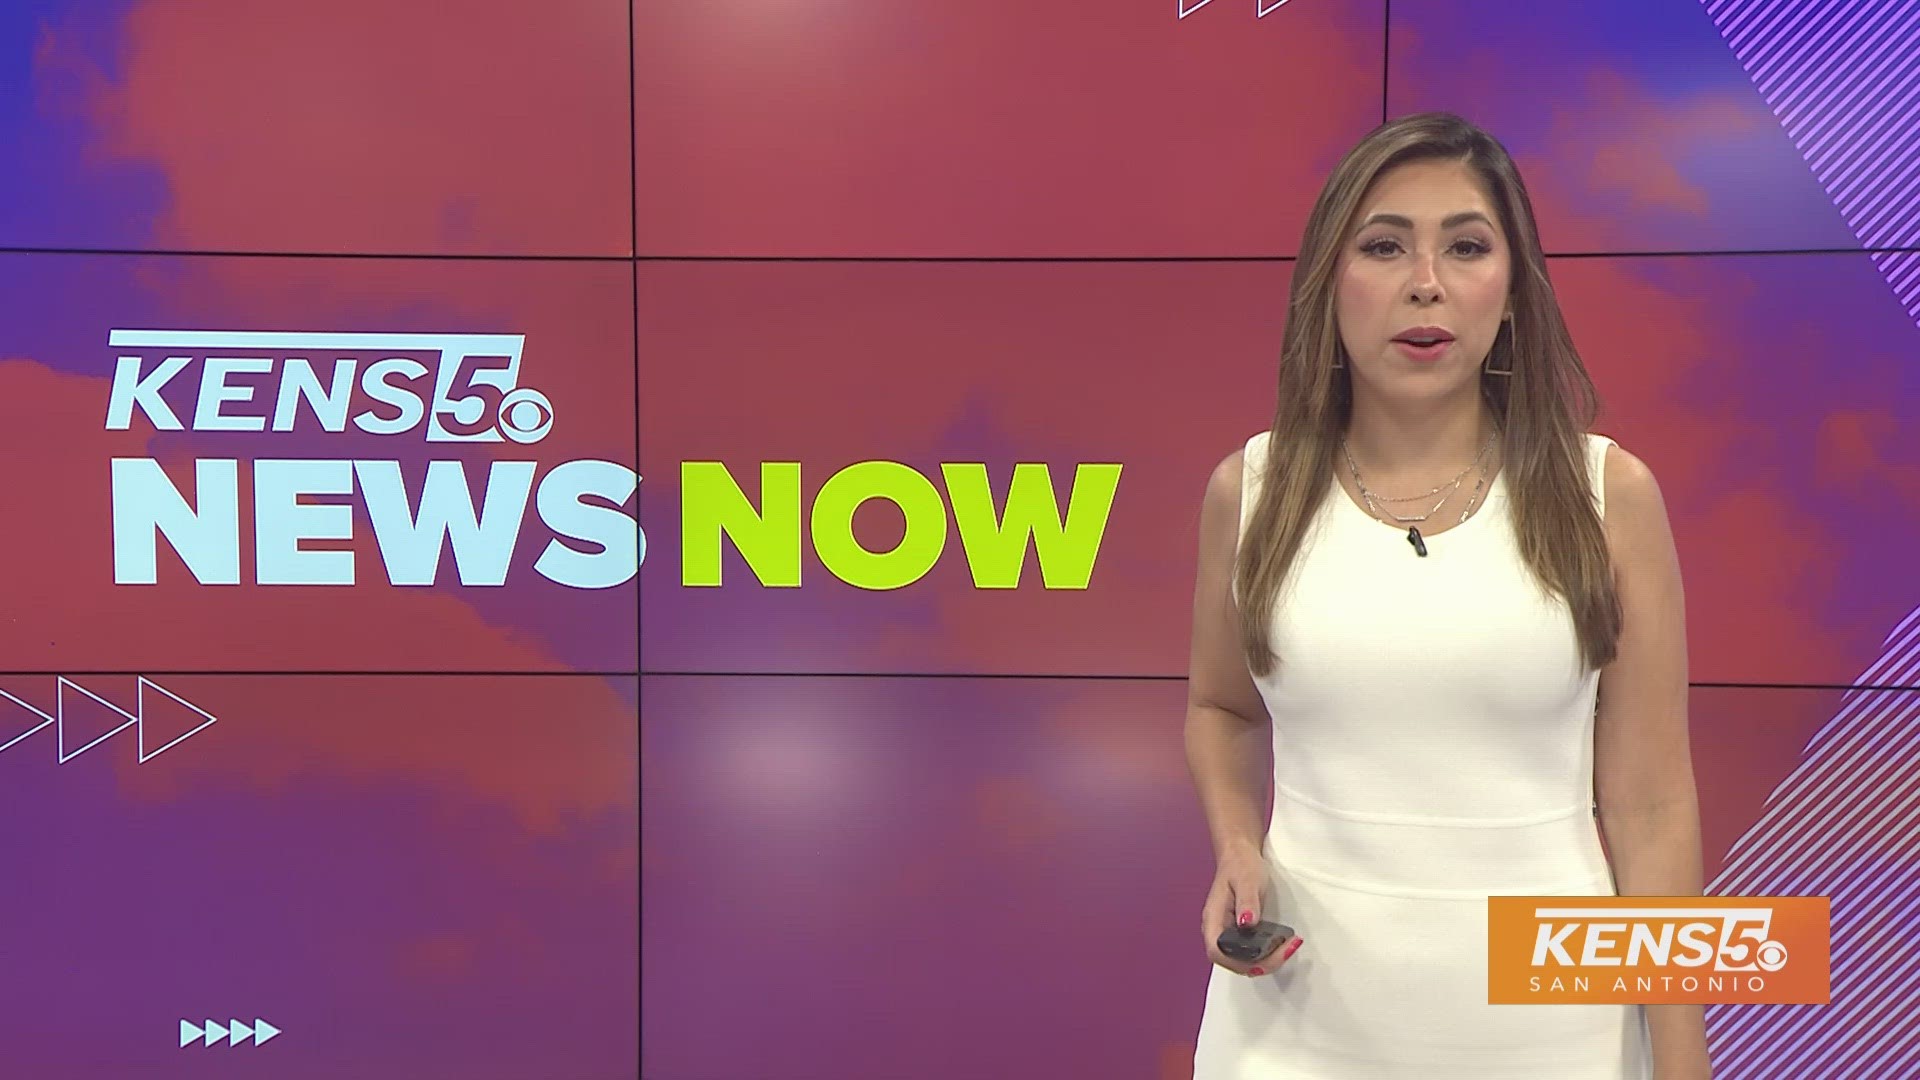 Follow us here to get the latest top headlines with the KENS 5 News team every weekday.